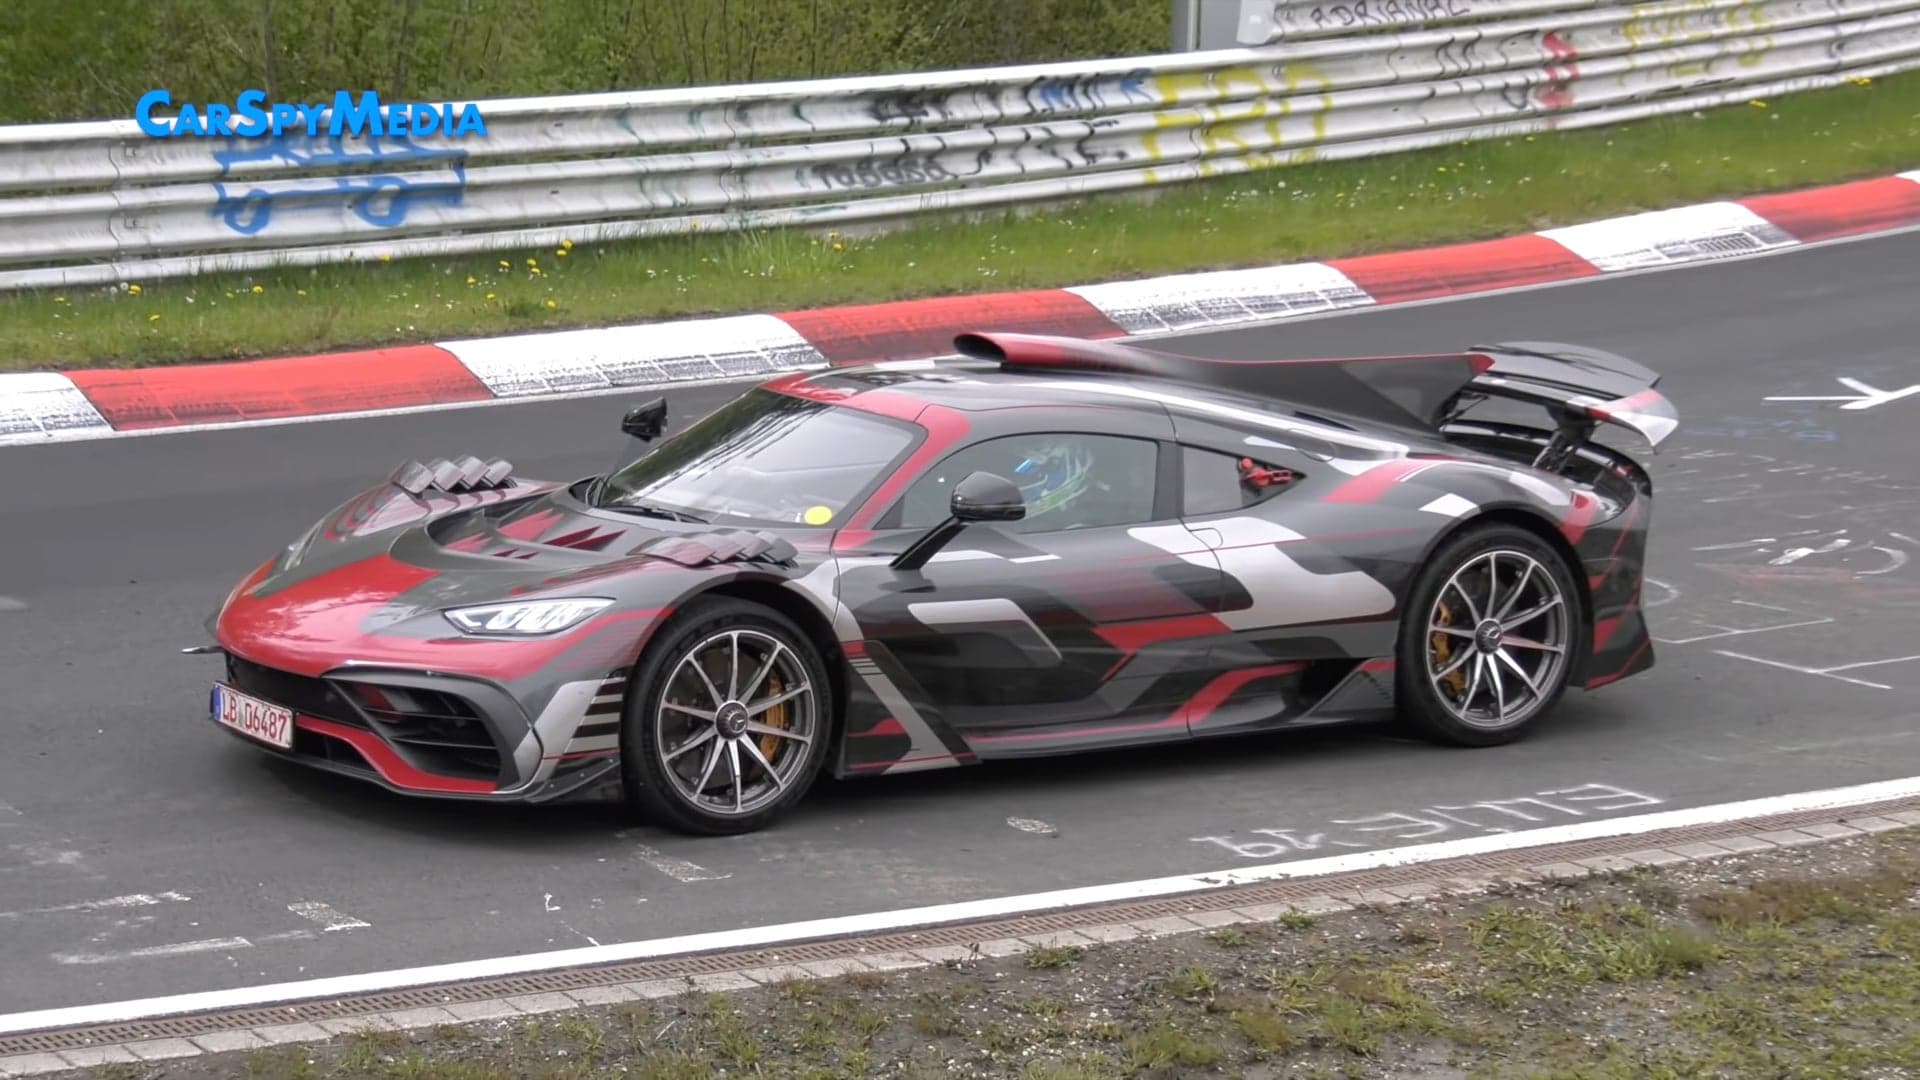 Listen to the Mercedes-AMG One Flex Its 1,000-HP F1 Powertrain at the Nurburgring